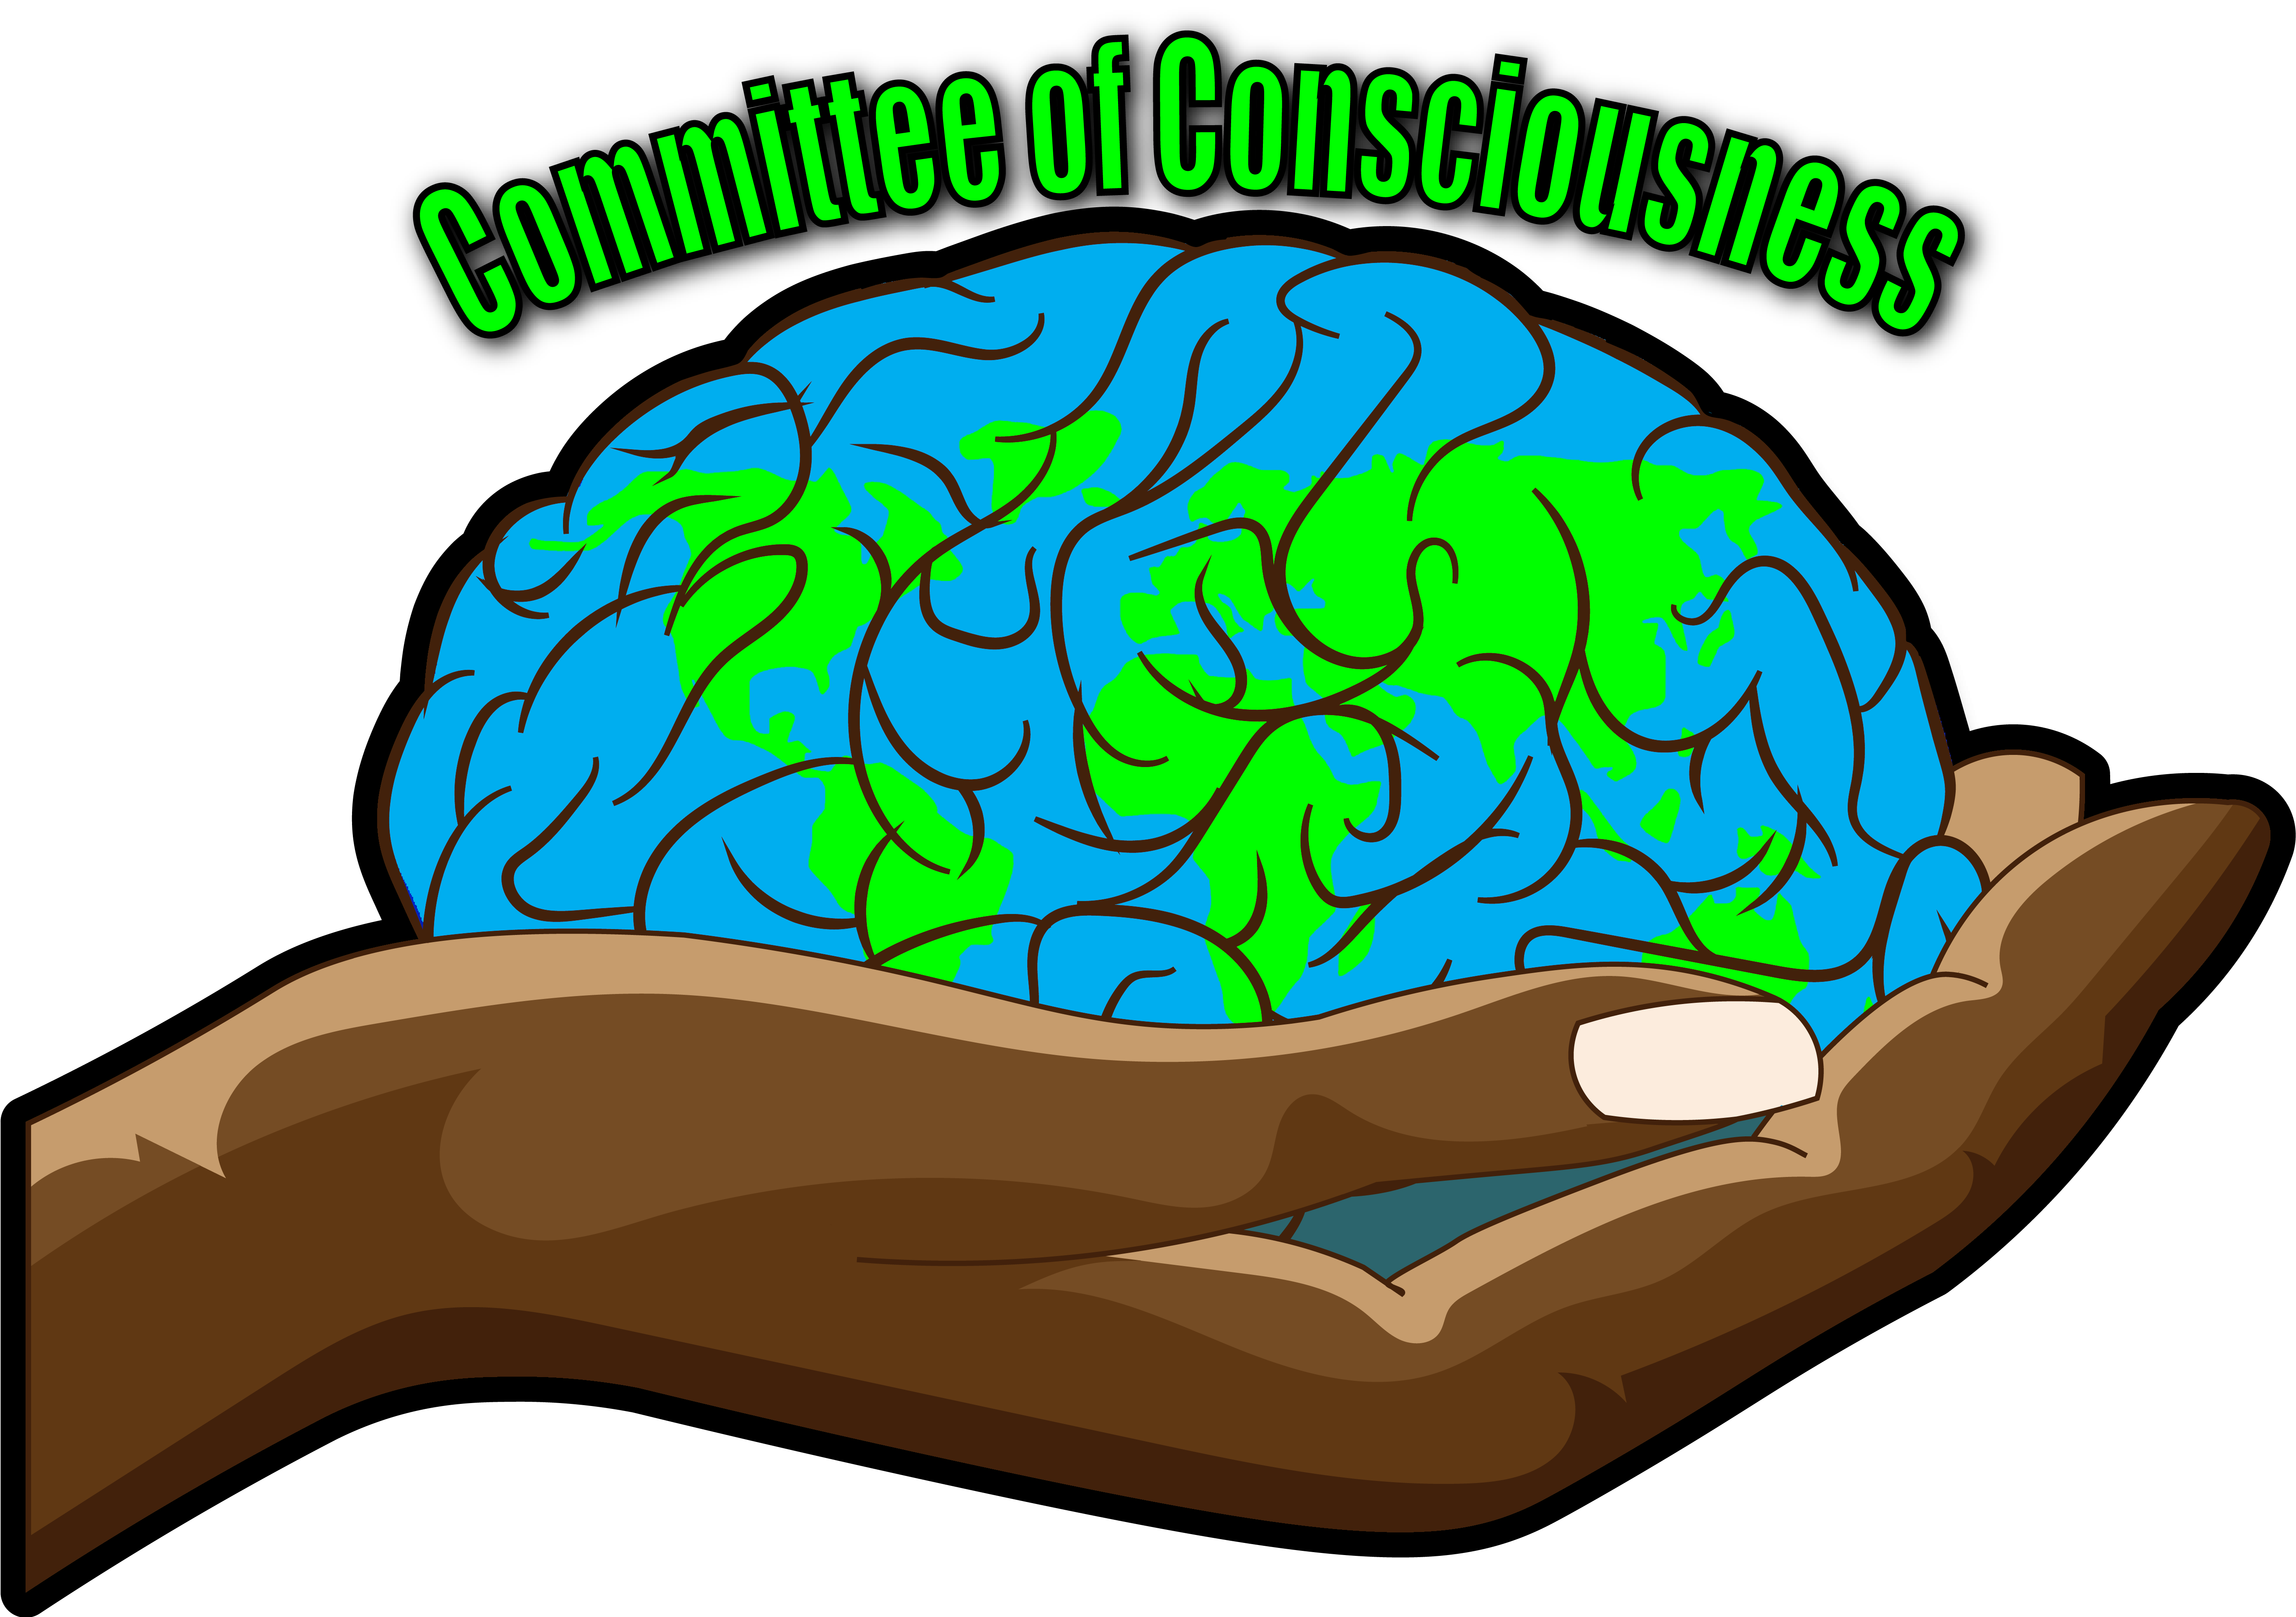 Committee of Consciousness